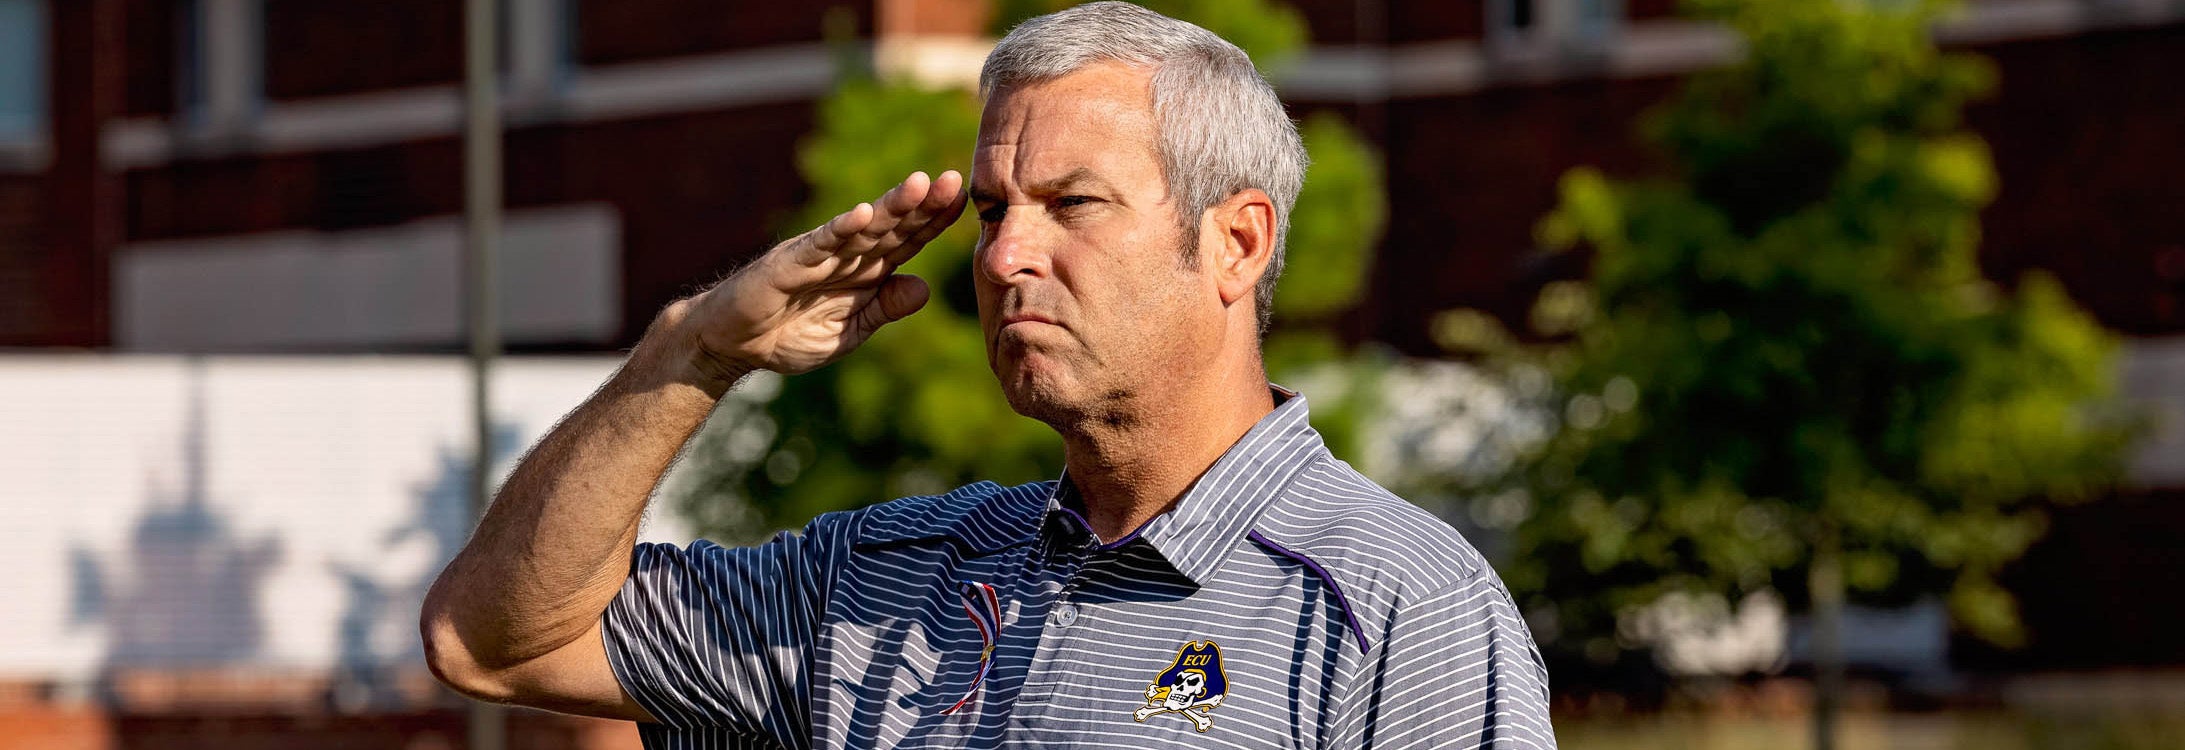 A salute is given during a 9/11 memorial dedication outside the Main Campus Student Center. ECU hosted a series of events during a weeklong commemoration of the 20th anniversary of the terrorist attacks. (Photos by Cliff Hollis)